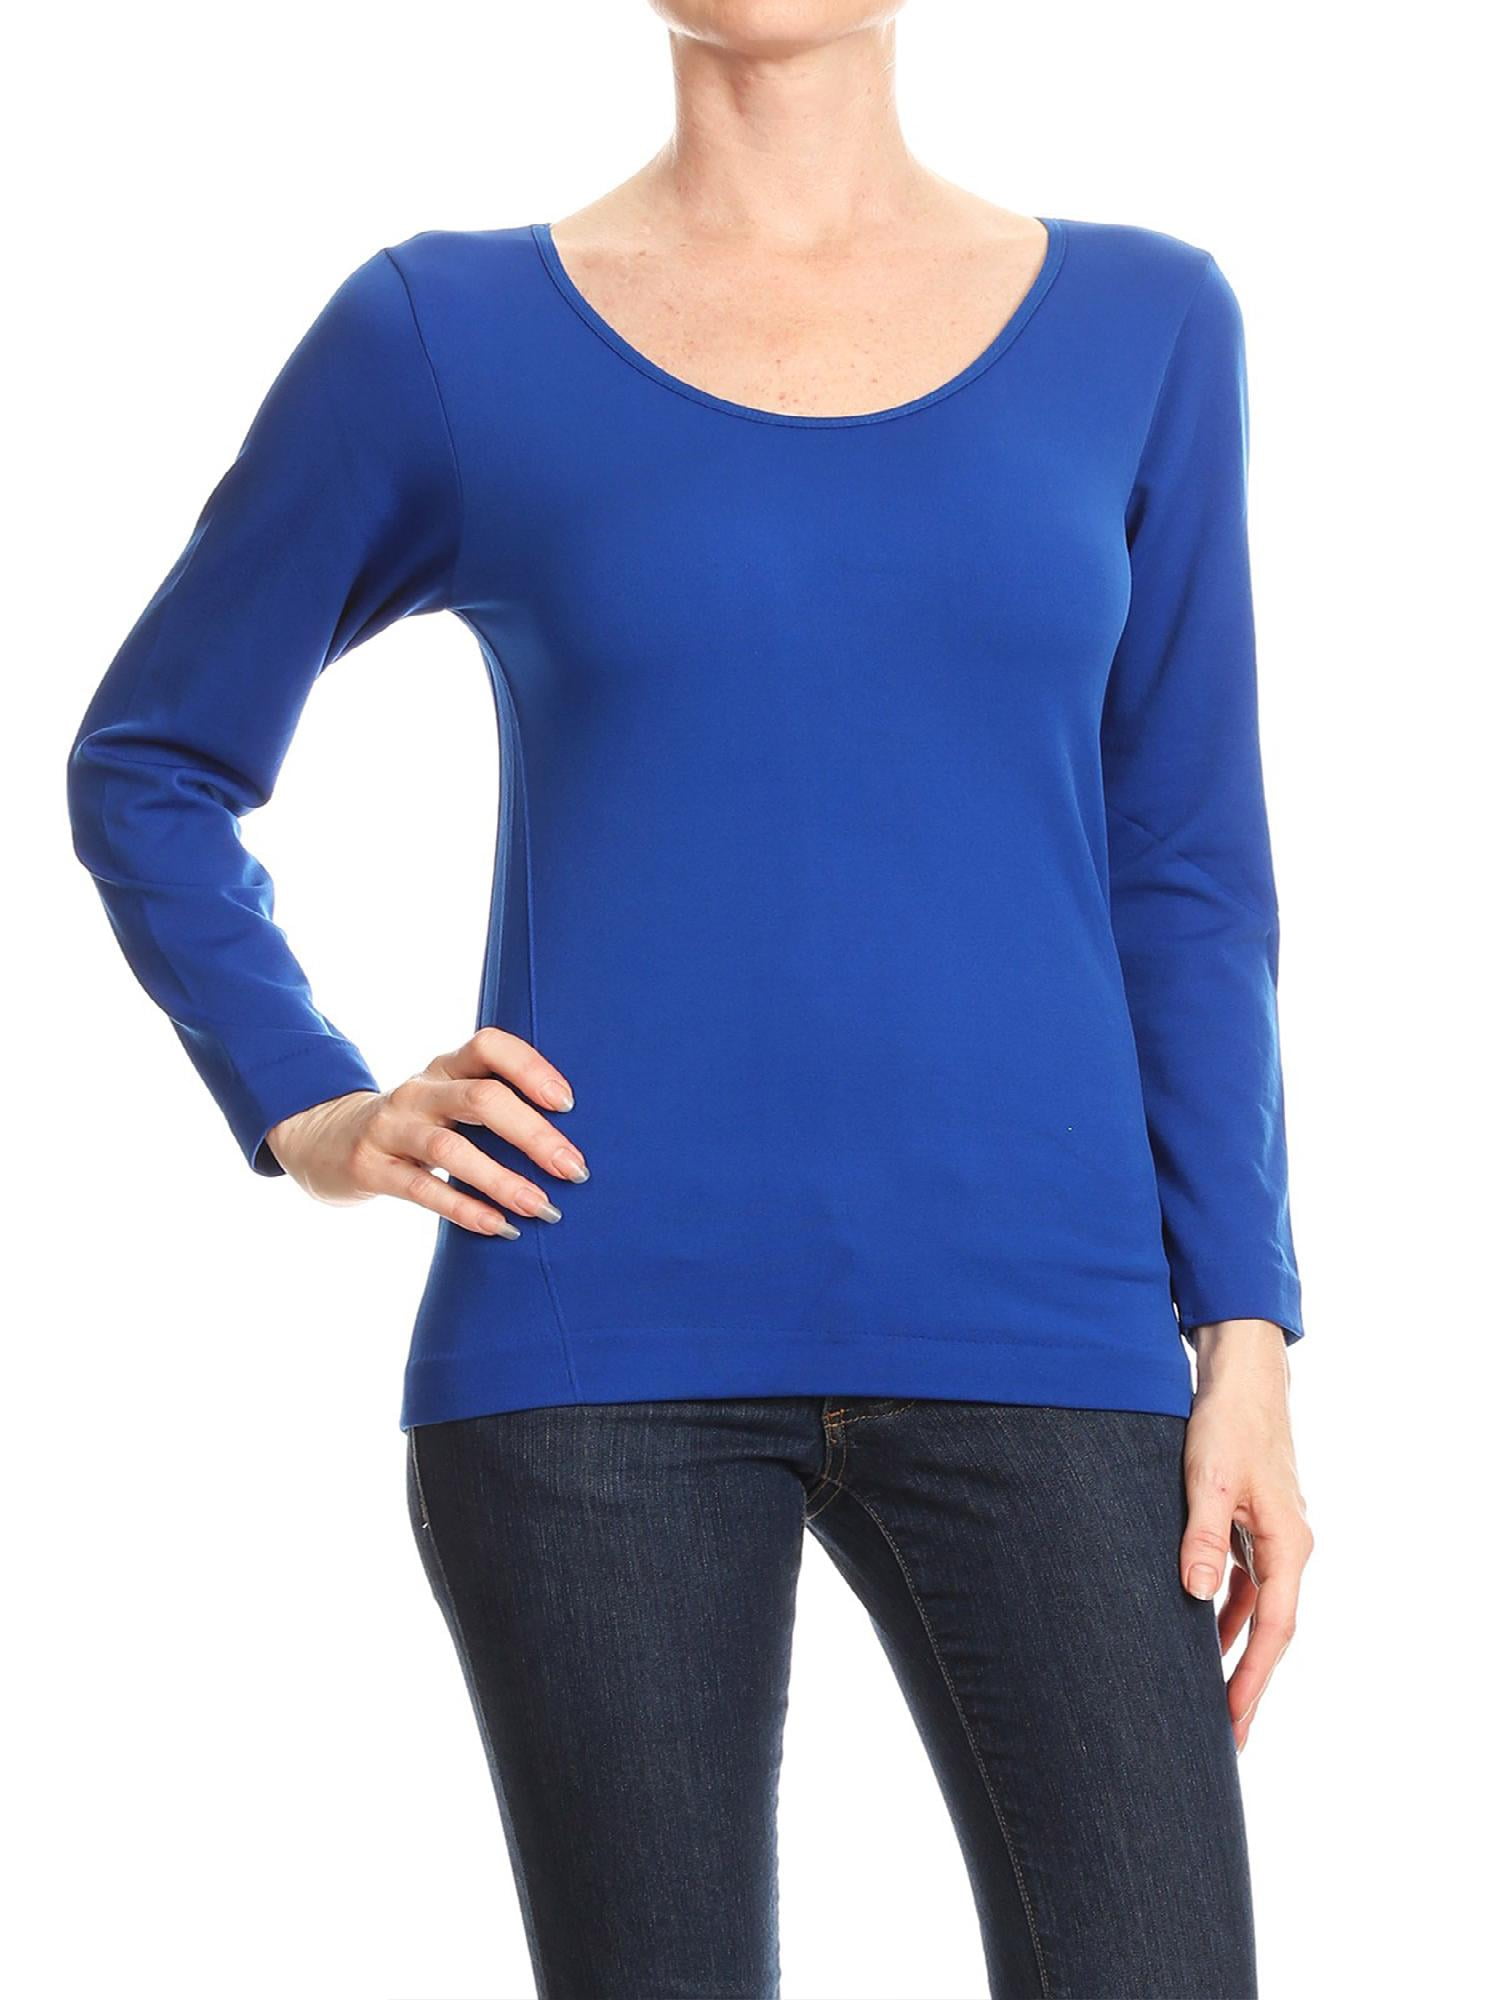 Women's Solid Casual Basic Lightweight Long Sleeves Relaxed Fit fleece ...